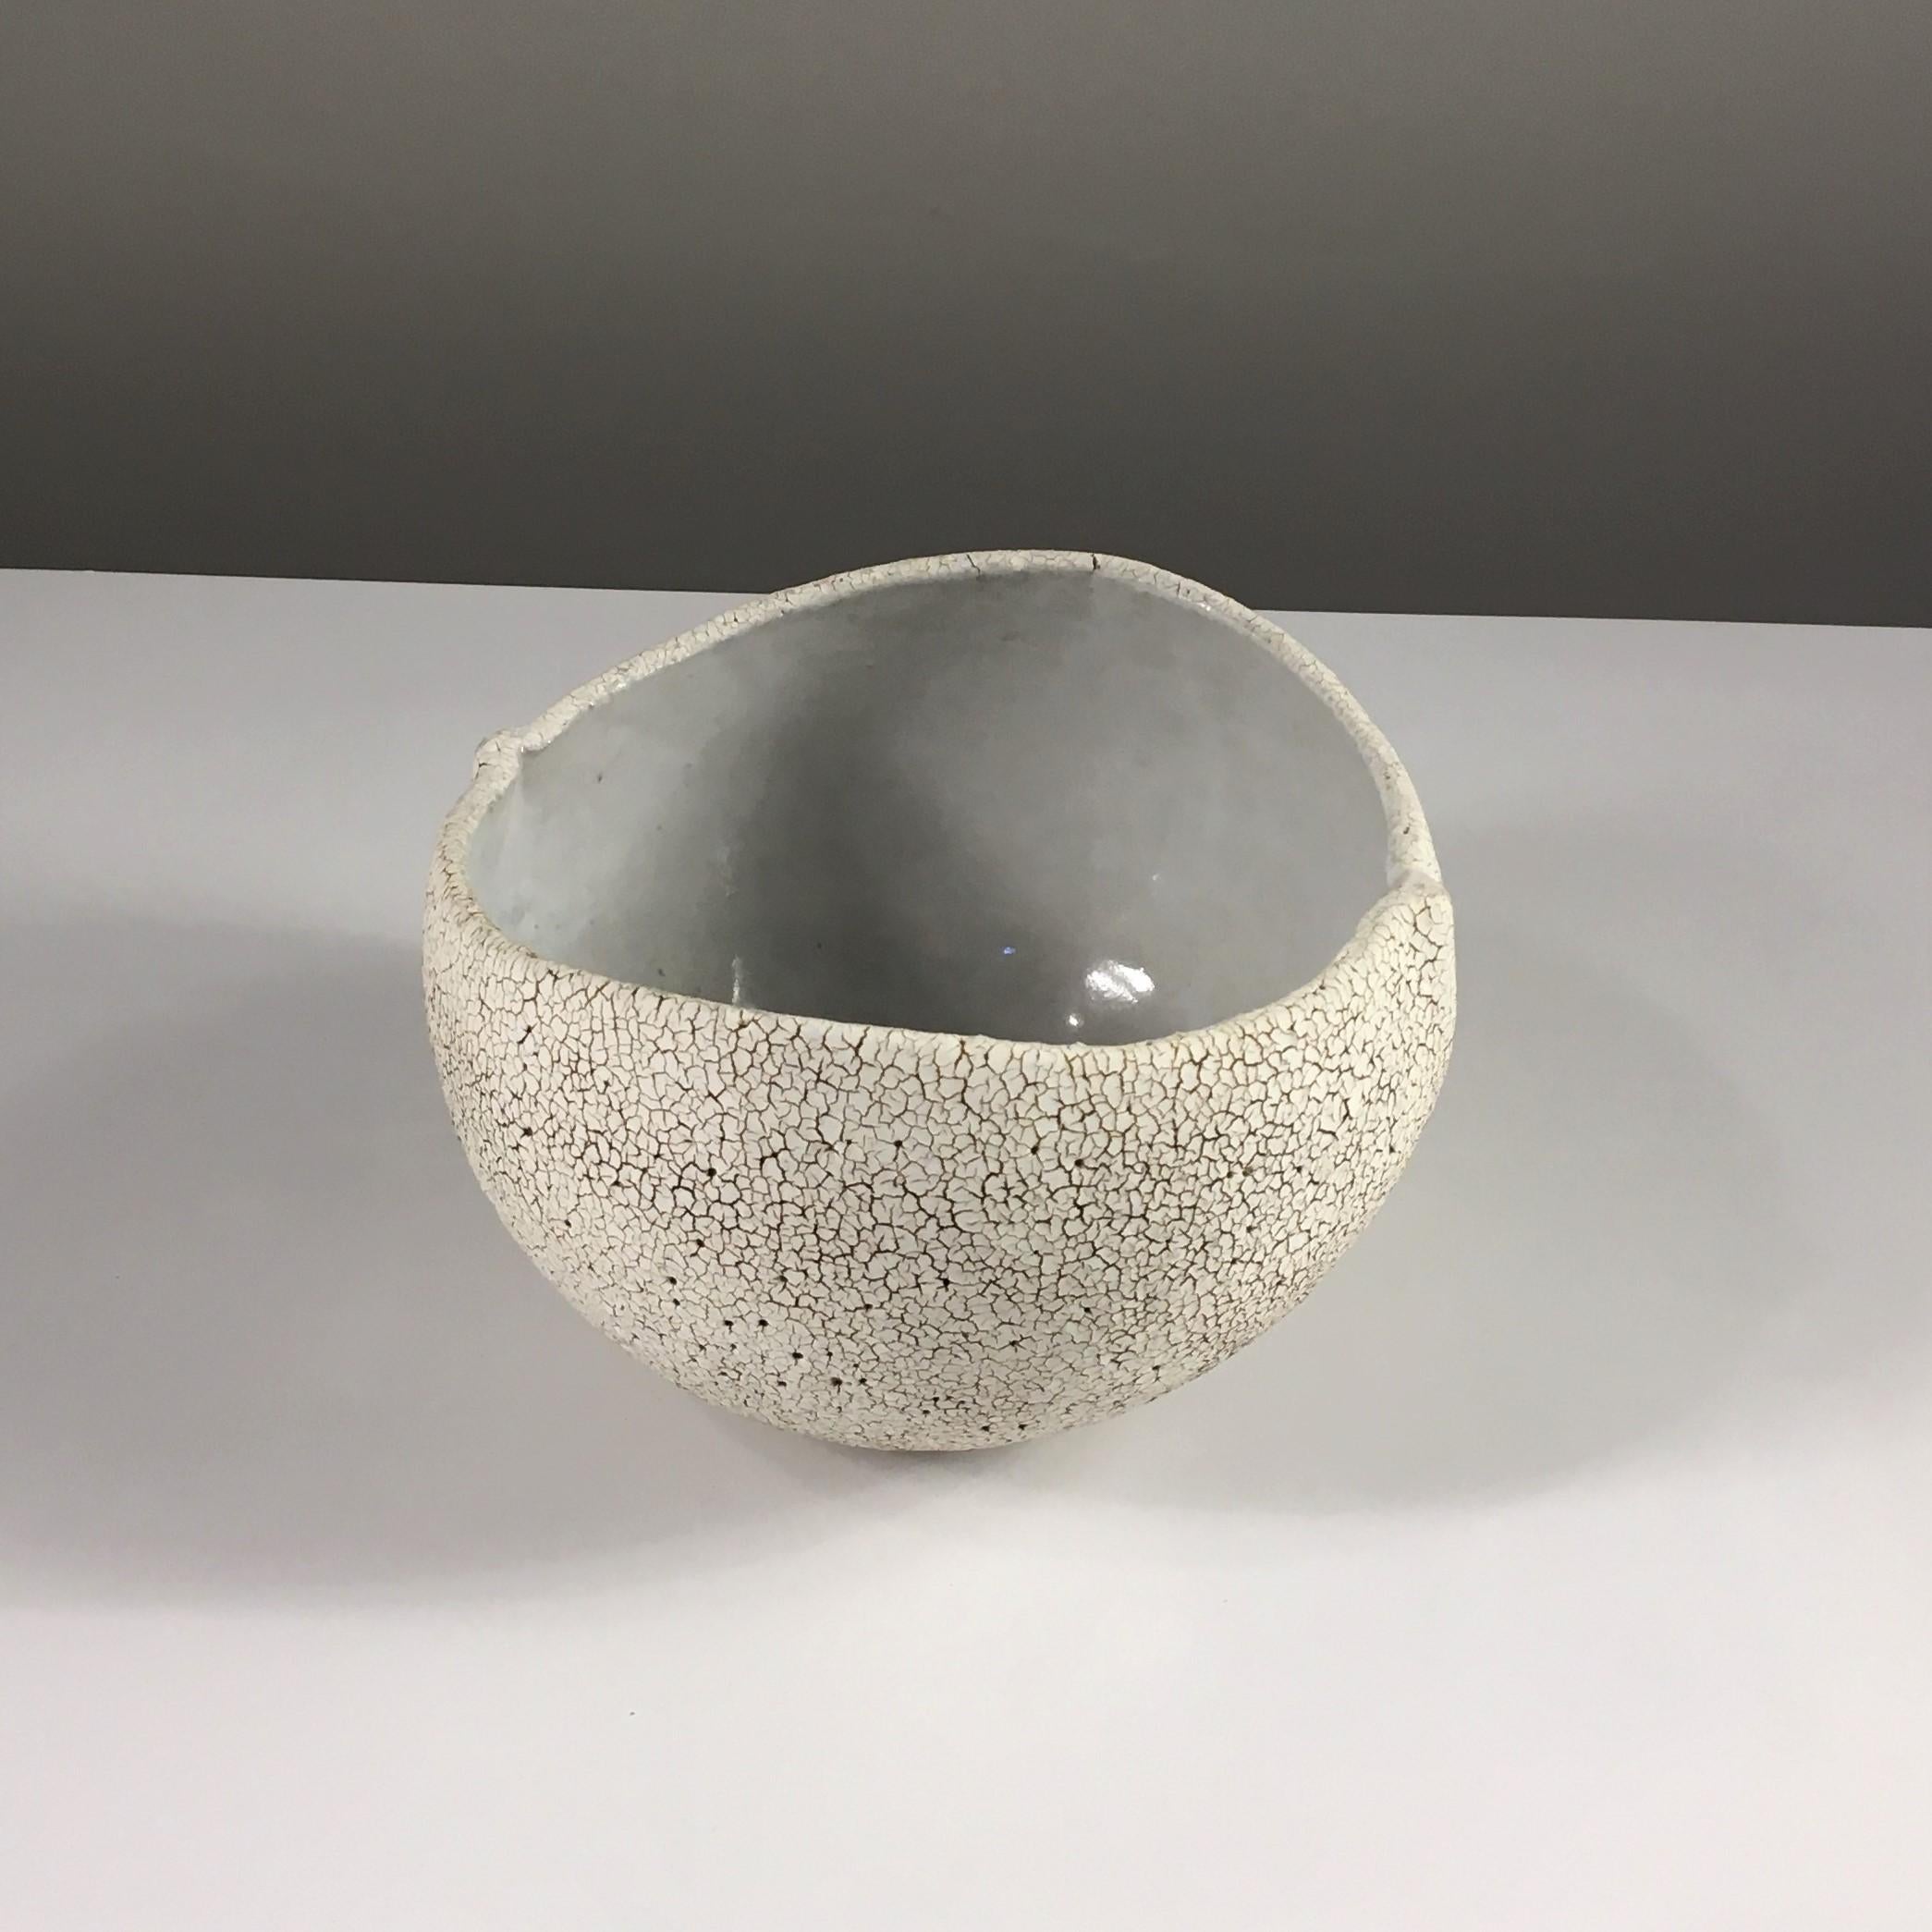 Ceramic Bowl with Grey Inner Glaze and Textured Outside by Yumiko Kuga. 
Dimensions: H 5